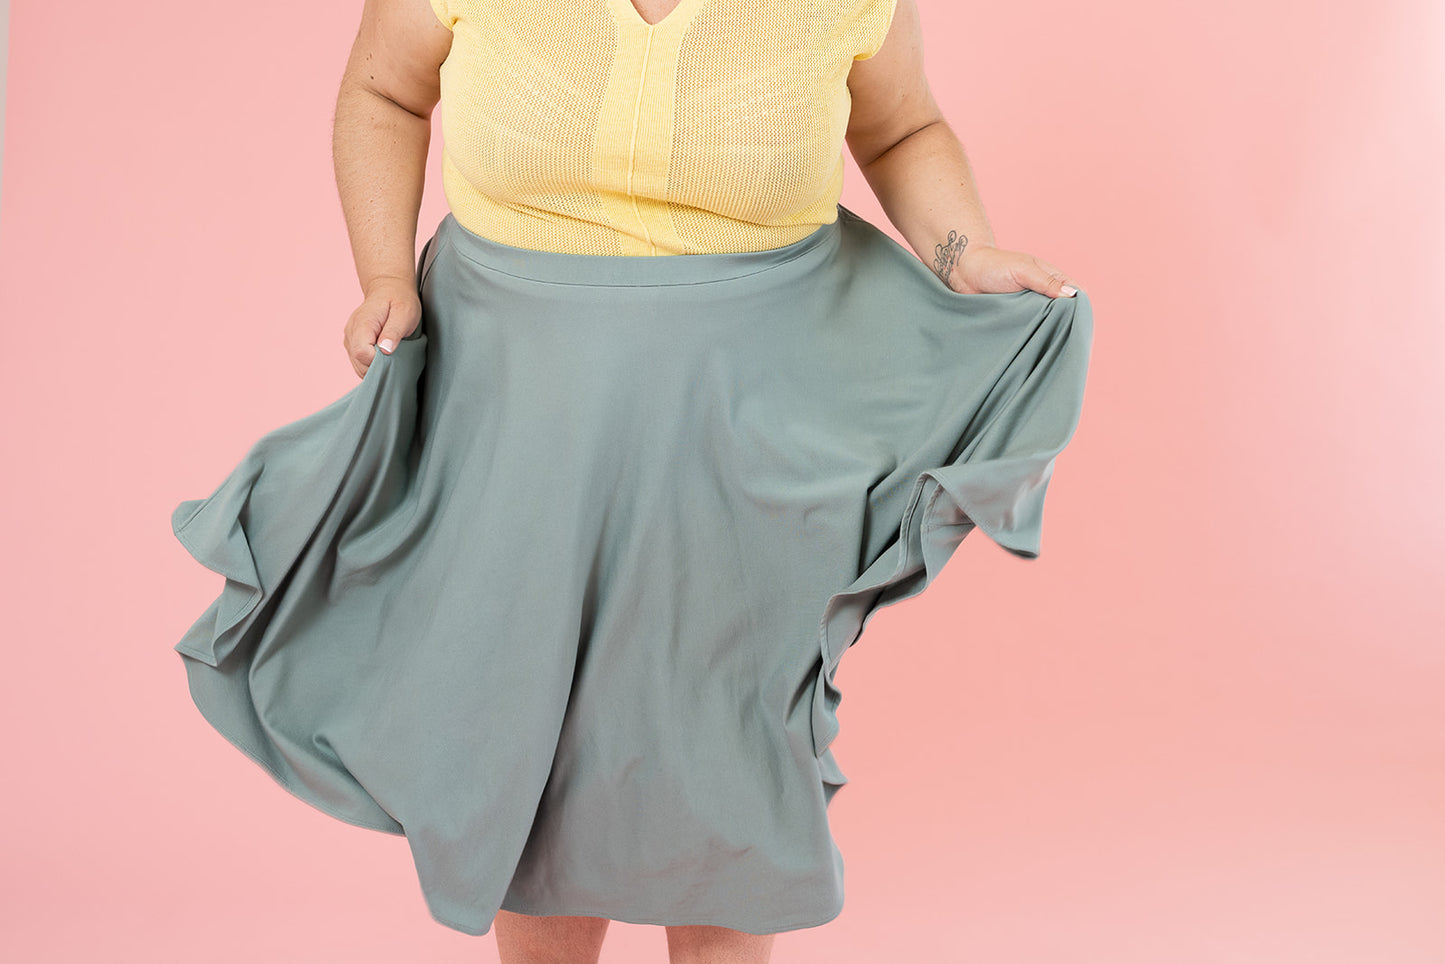 A woman wearing a light yellow top and a light blue skirt is swishing the hem of her skirt to show it off.